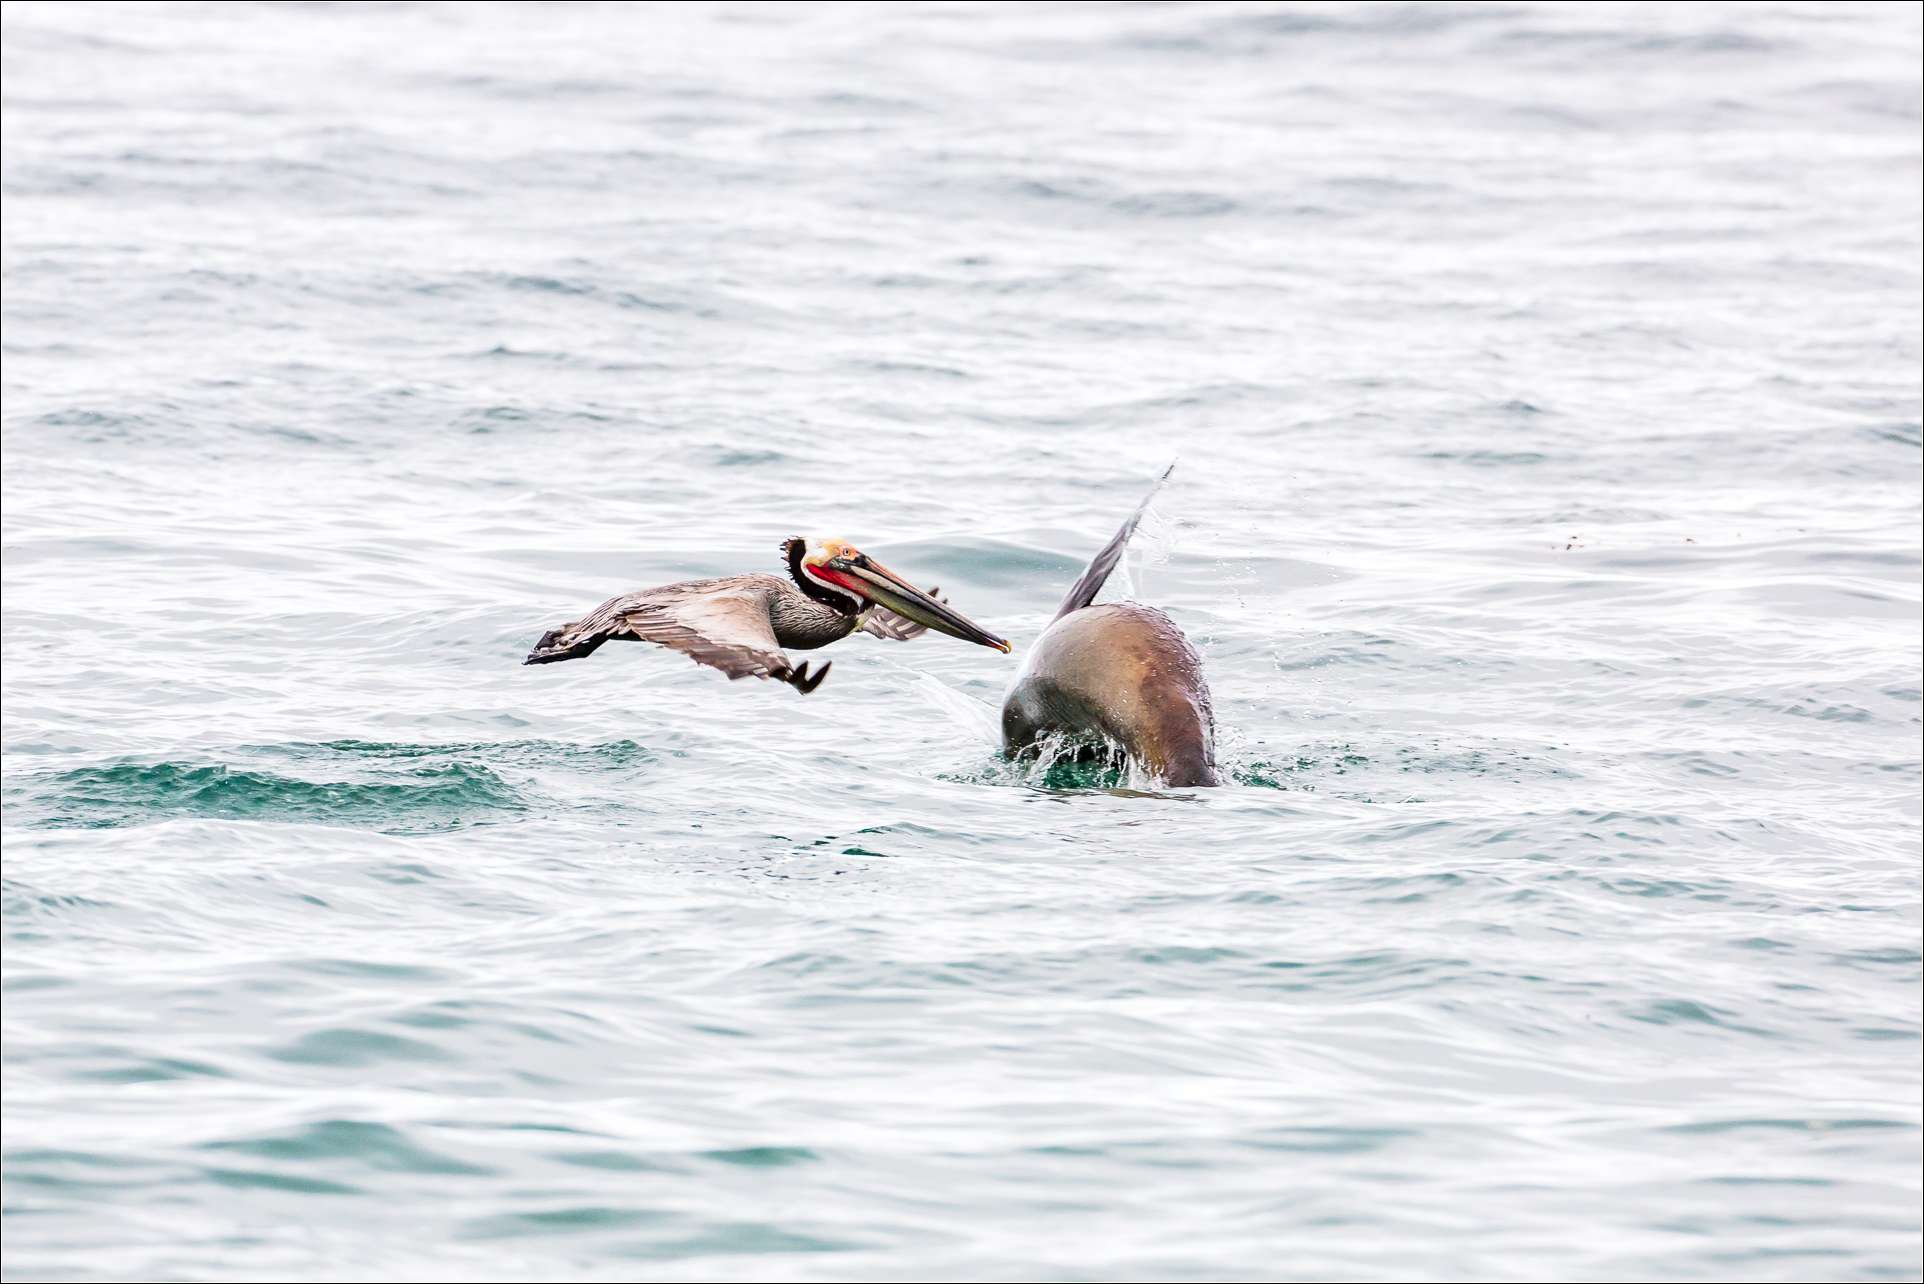 Pelican flight and seal leap - 2013 © Christopher Martin